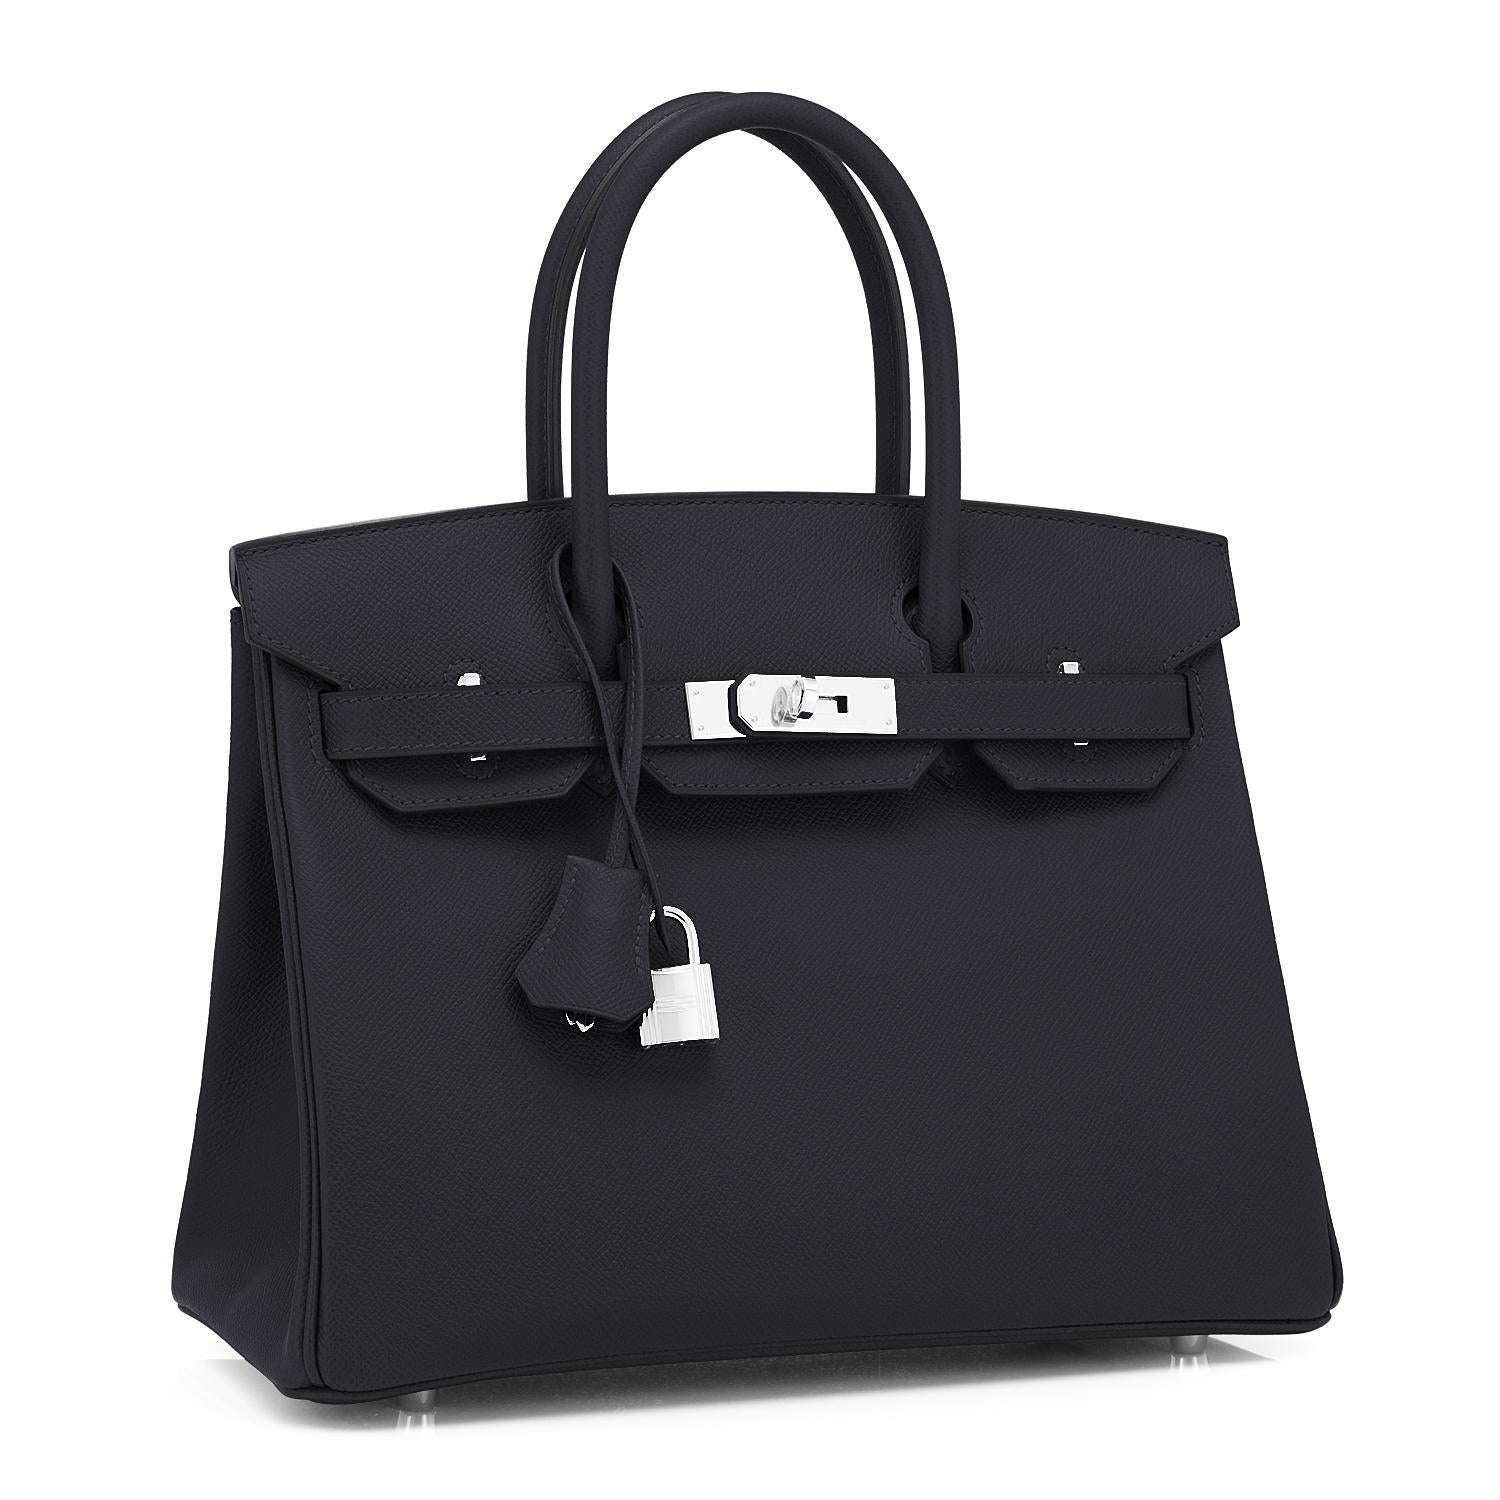 Hermes Birkin 30cm Black Epsom Palladium Bag Y Stamp, 2020
Just purchased from Hermes store; bag bears new interior Y 2020 Stamp.
Brand New in Box. Store fresh.  Pristine Condition (with plastic on hardware)
Perfect gift! Comes with keys, lock,